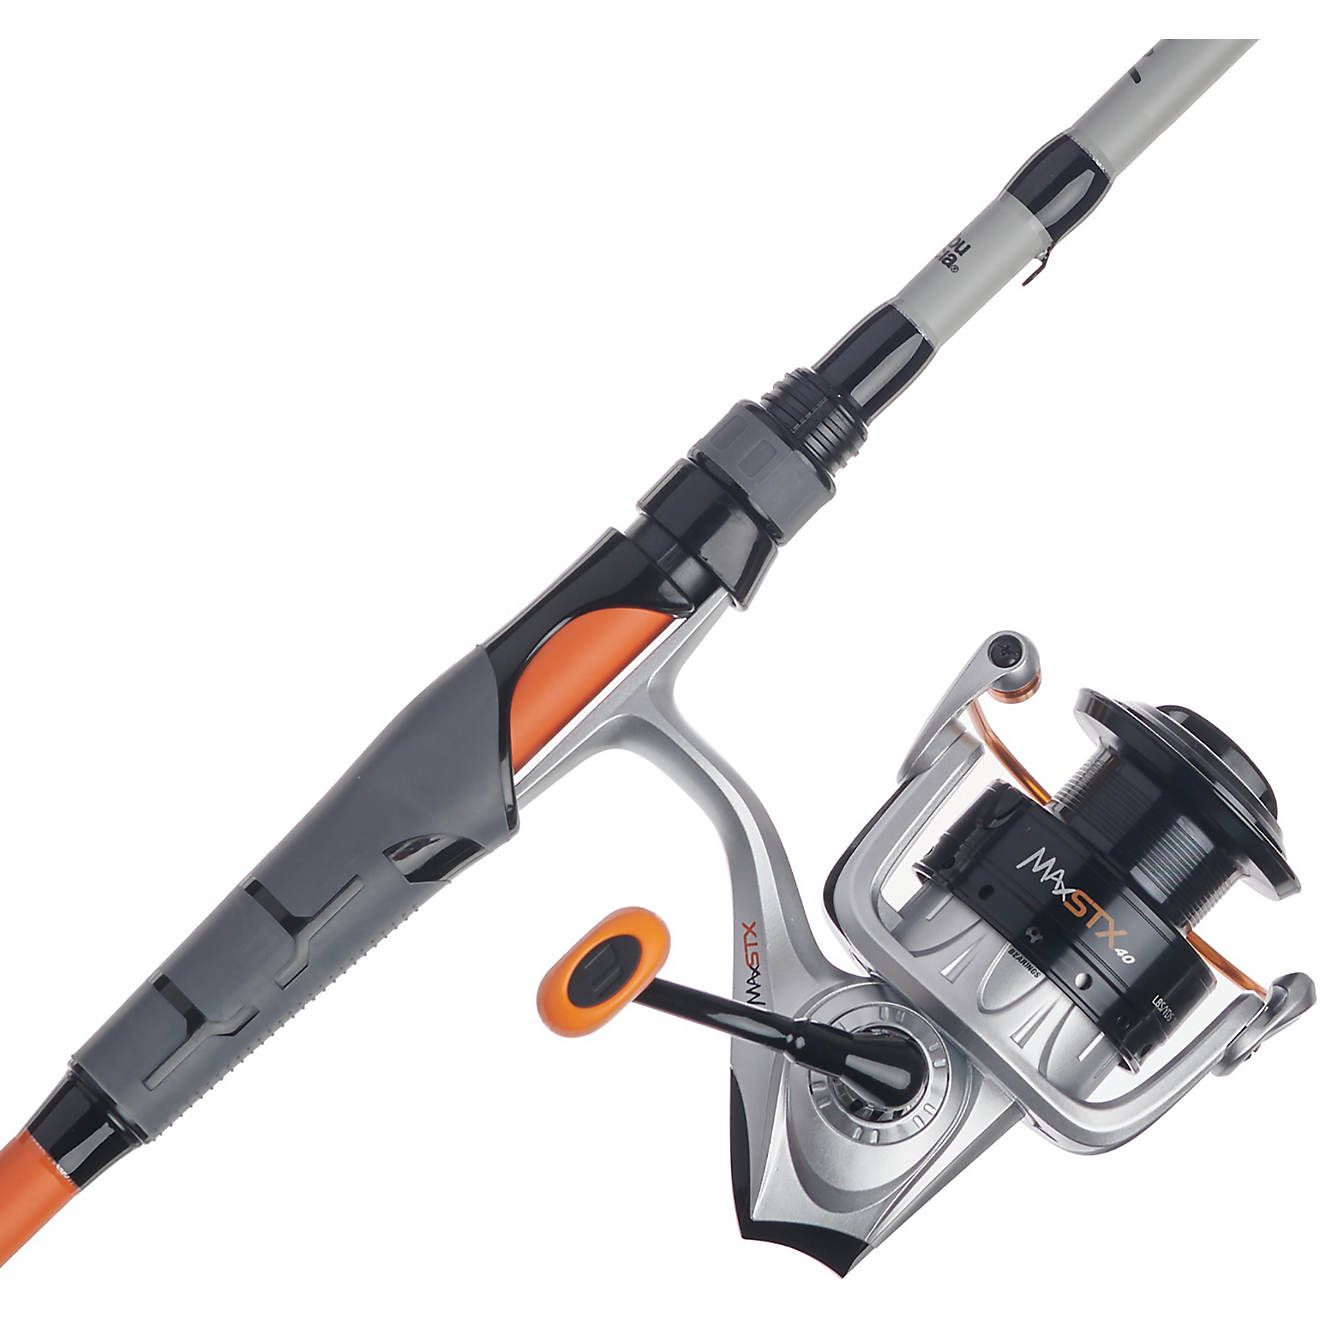 Abu Garcia Max STX 30 6' 6" M Freshwater Spinning Rod and Reel Combo | Academy | Academy Sports + Outdoors